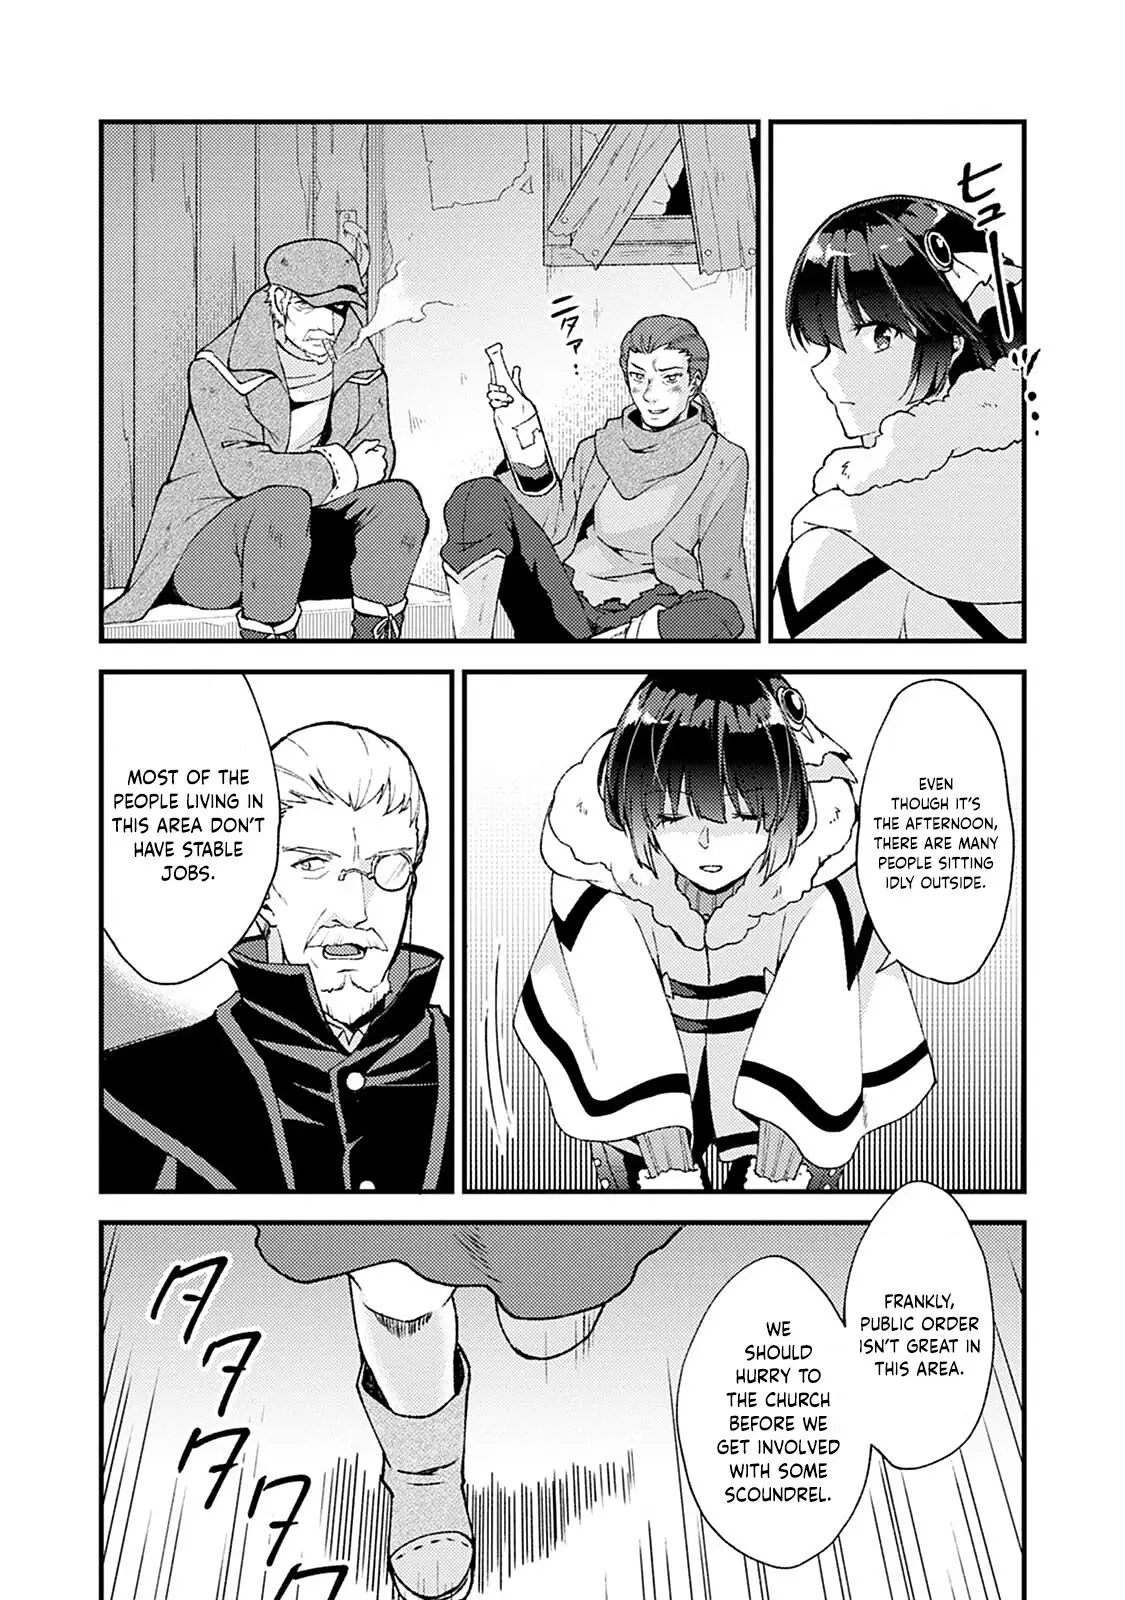 A Sword Master Childhood Friend Power Harassed Me Harshly, So I Broke Off Our Relationship And Make A Fresh Start At The Frontier As A Magic Swordsman. - 10 page 13